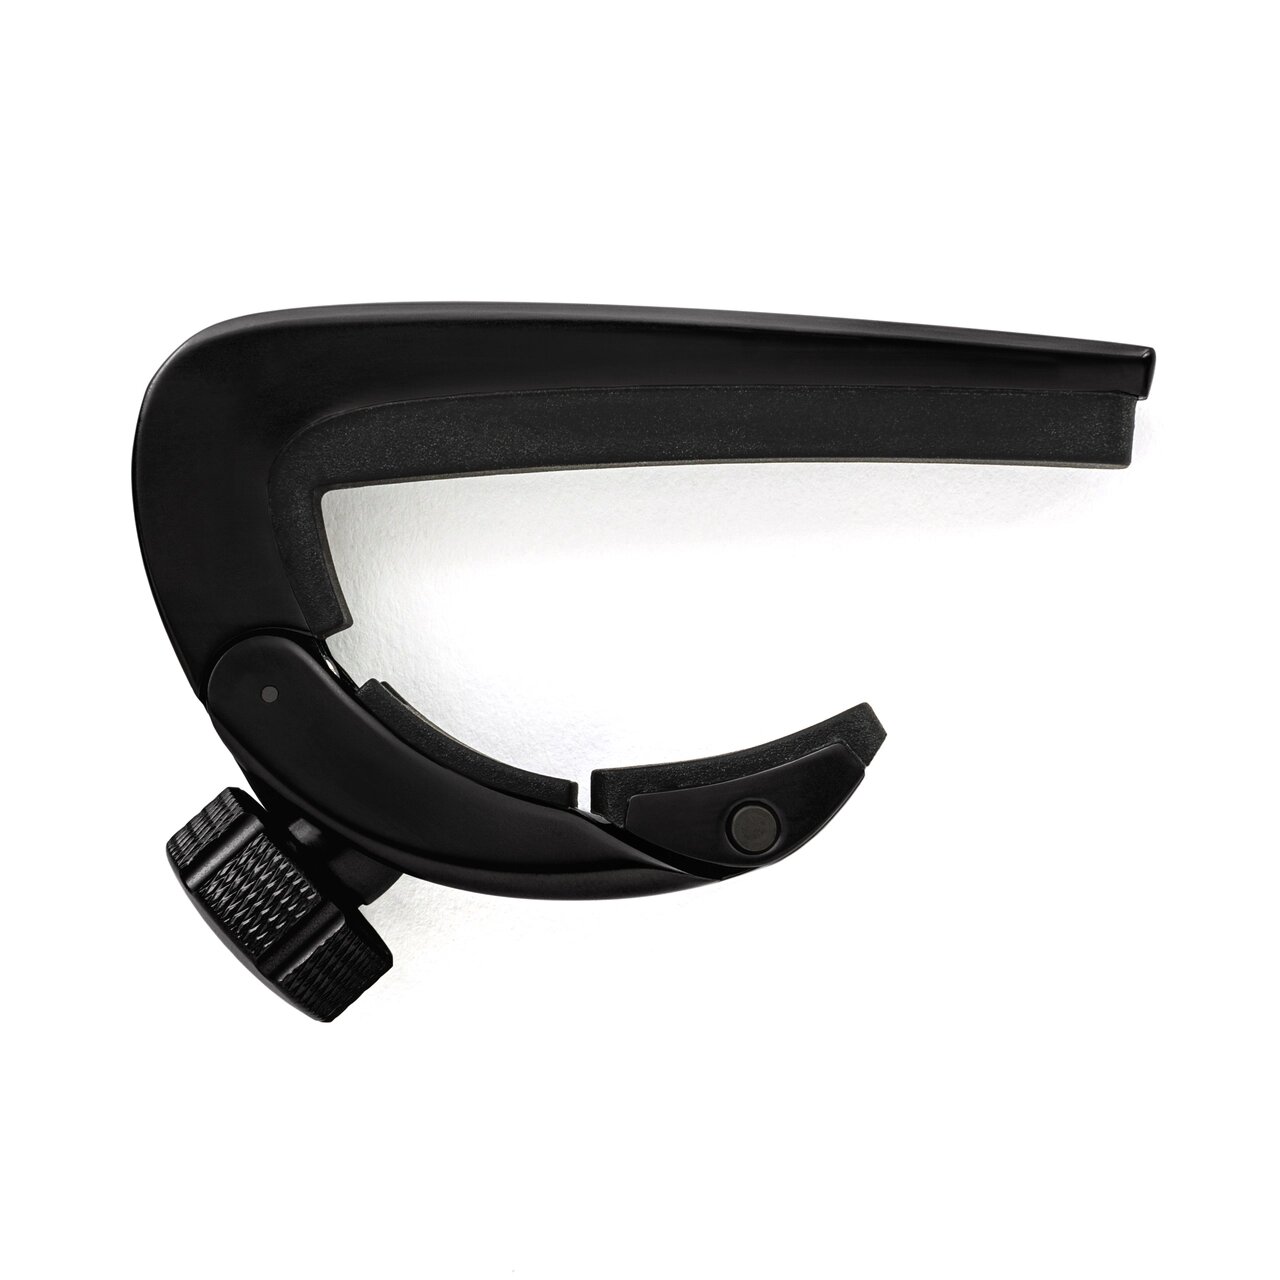 Dunlop DPCBK Capo with self-centering 